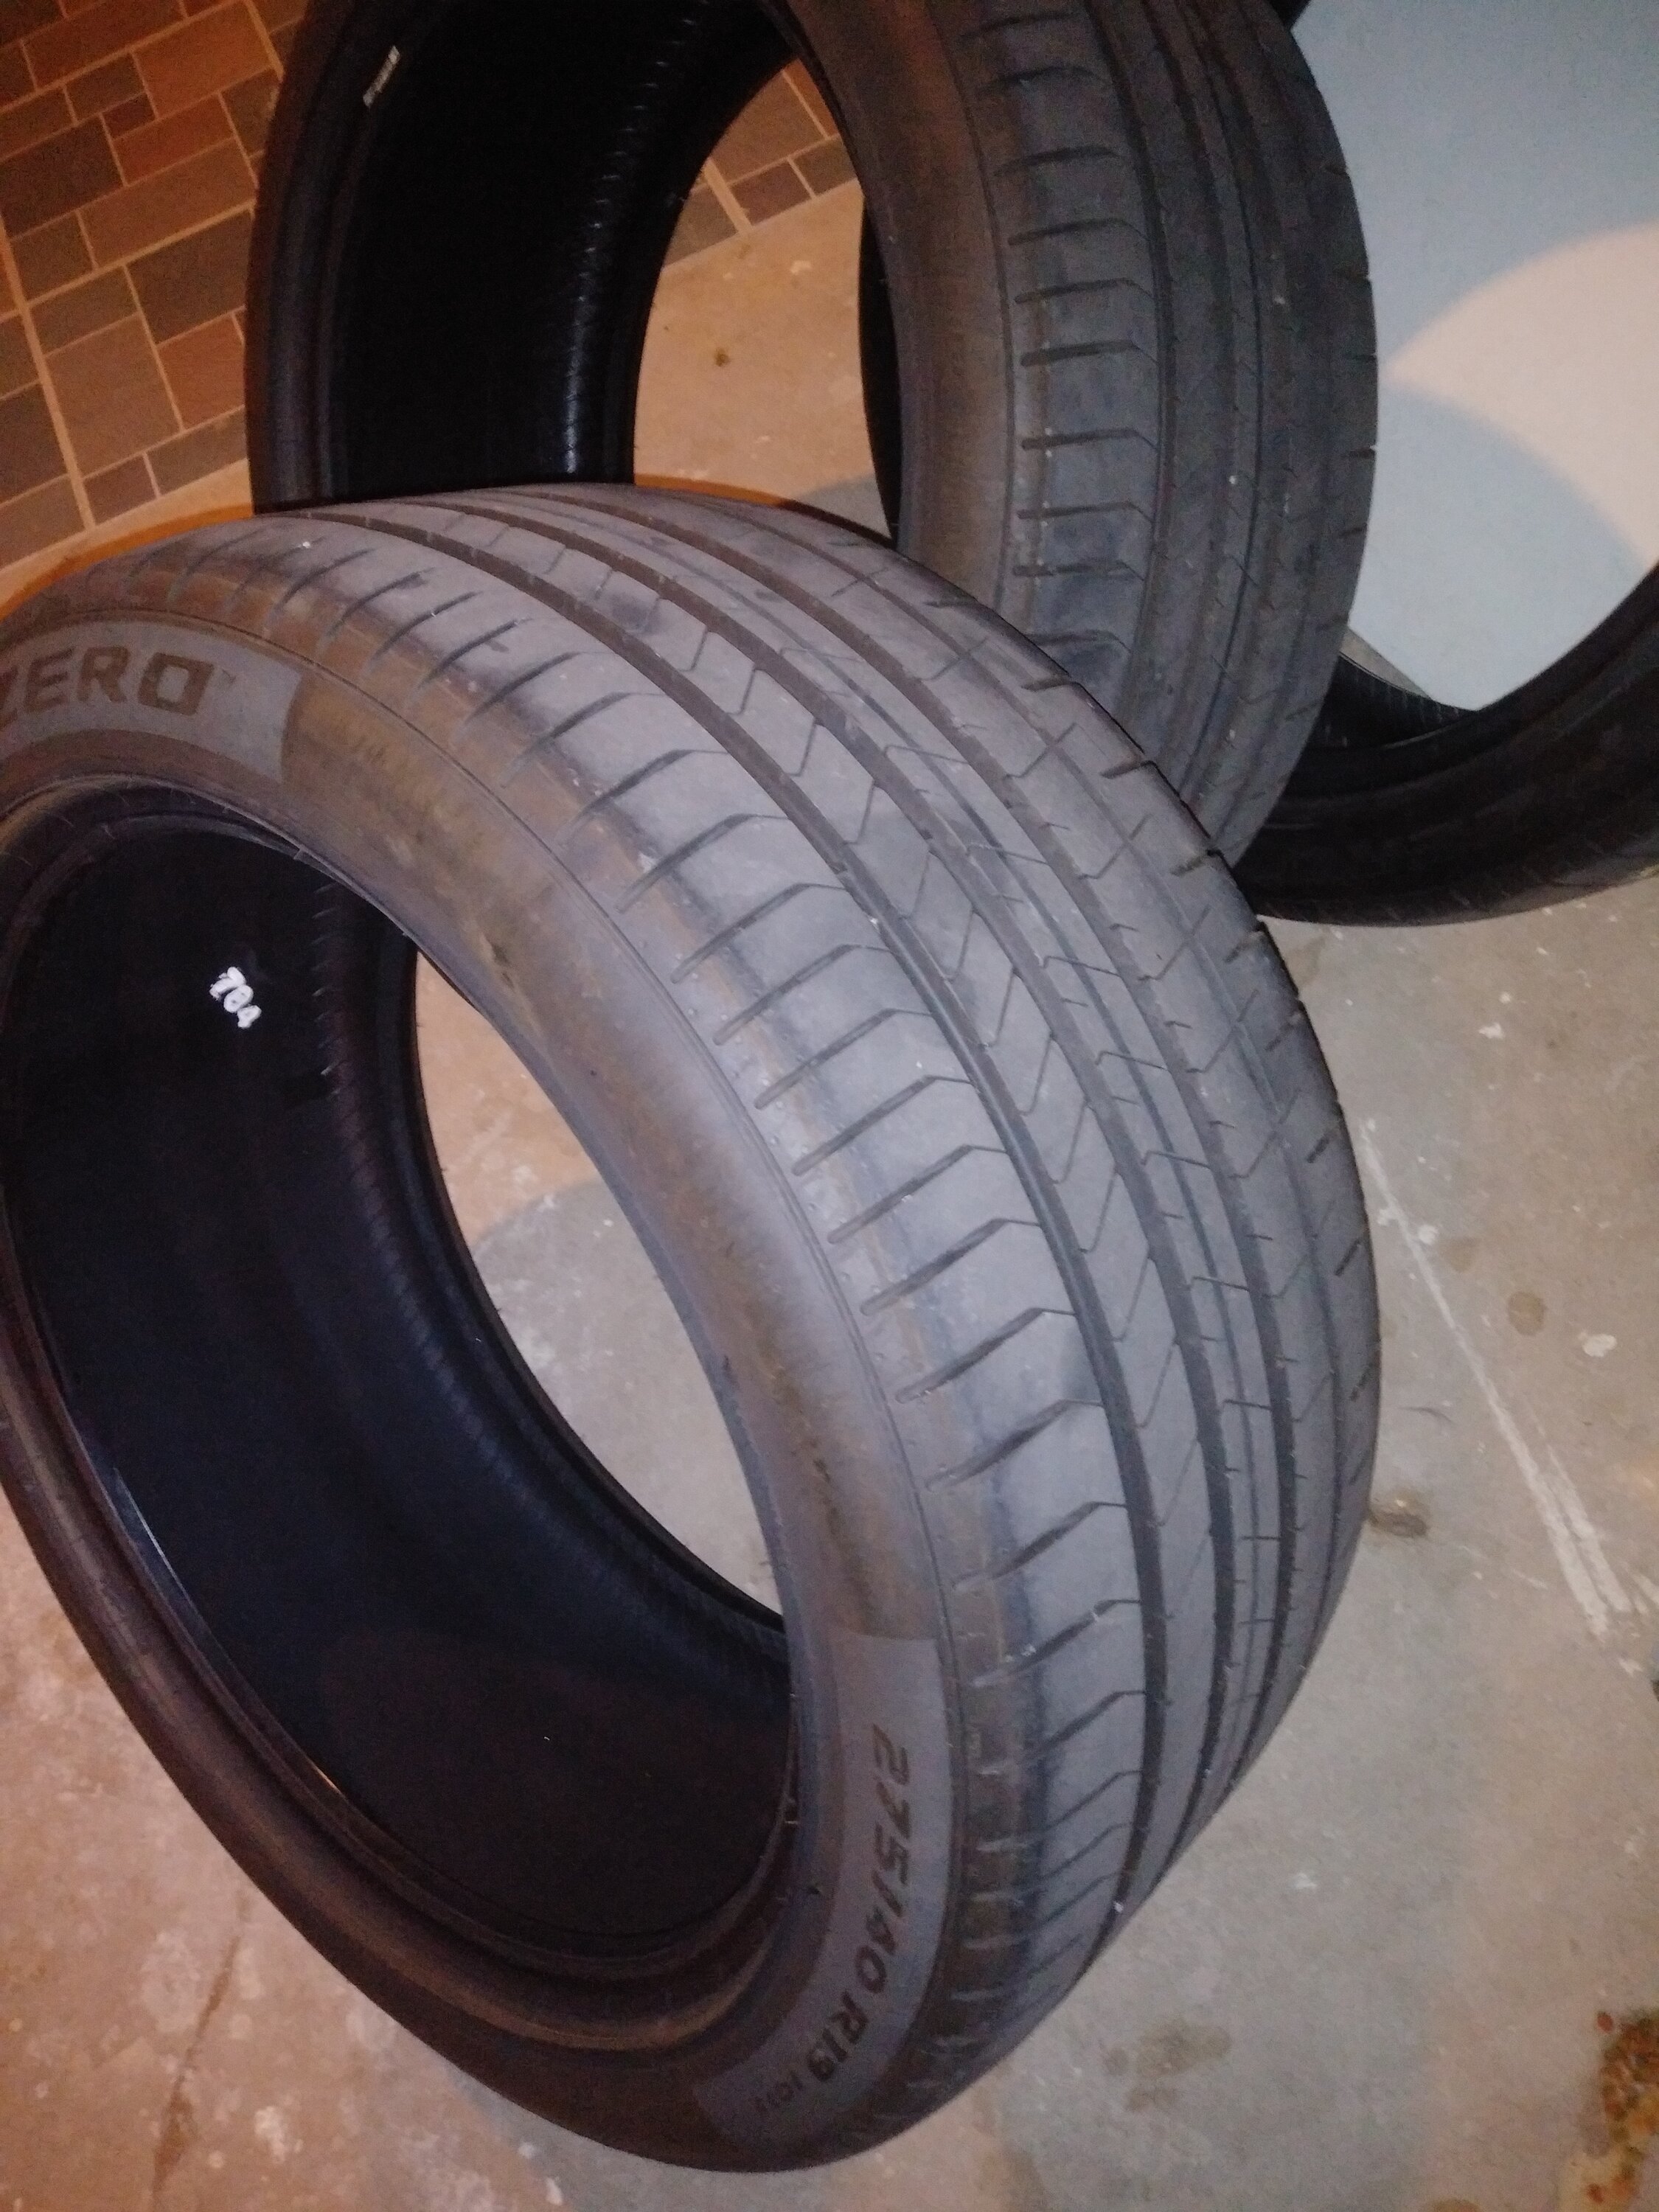 S650 Mustang 4 summer Pirelli tires off of 24 GT Premium. 20230922_164210_resized